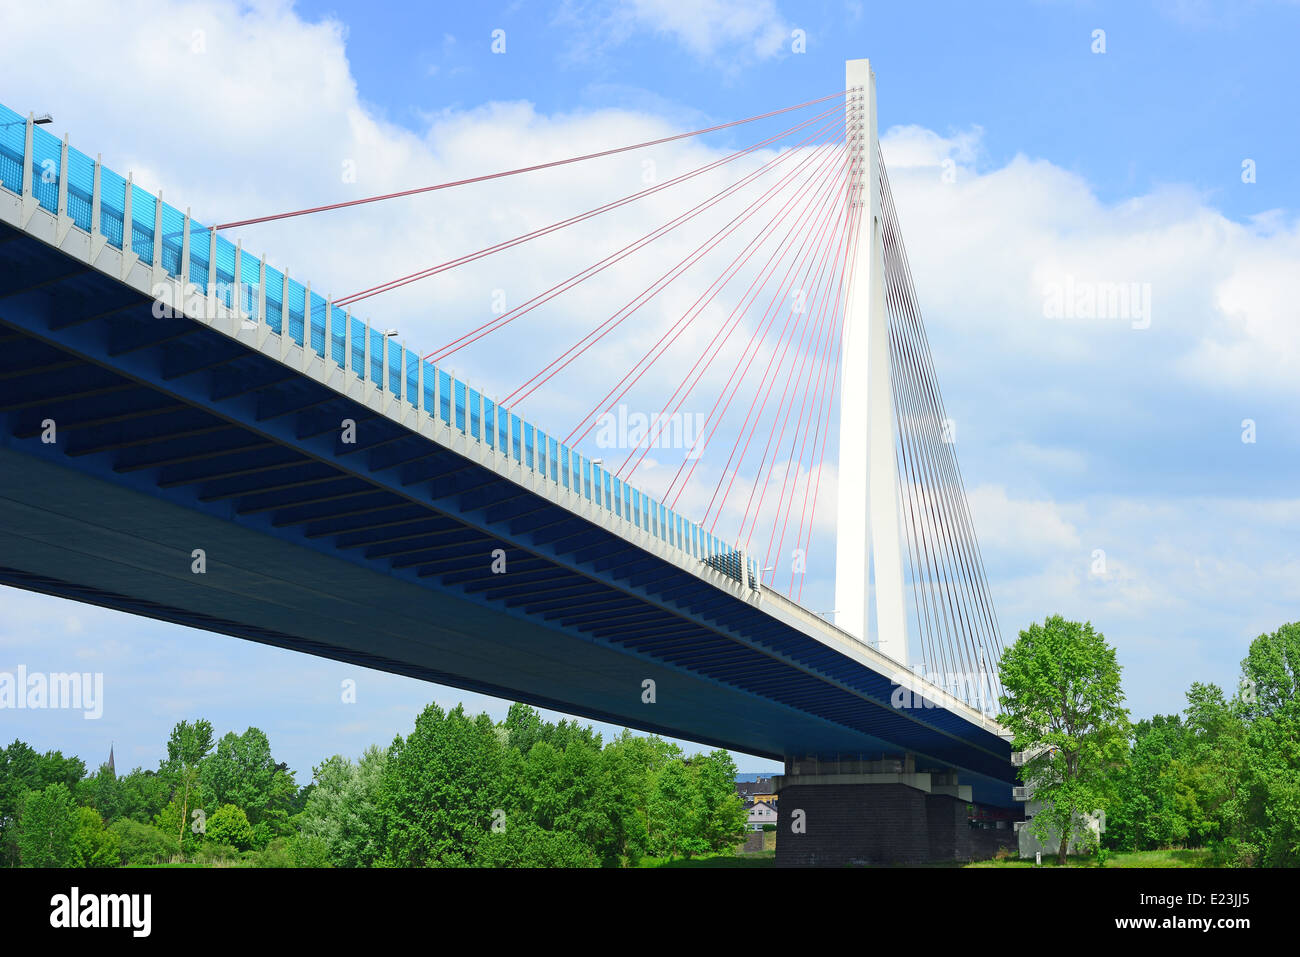 An image of the modern Neuwied Bridge in Germany Stock Photo